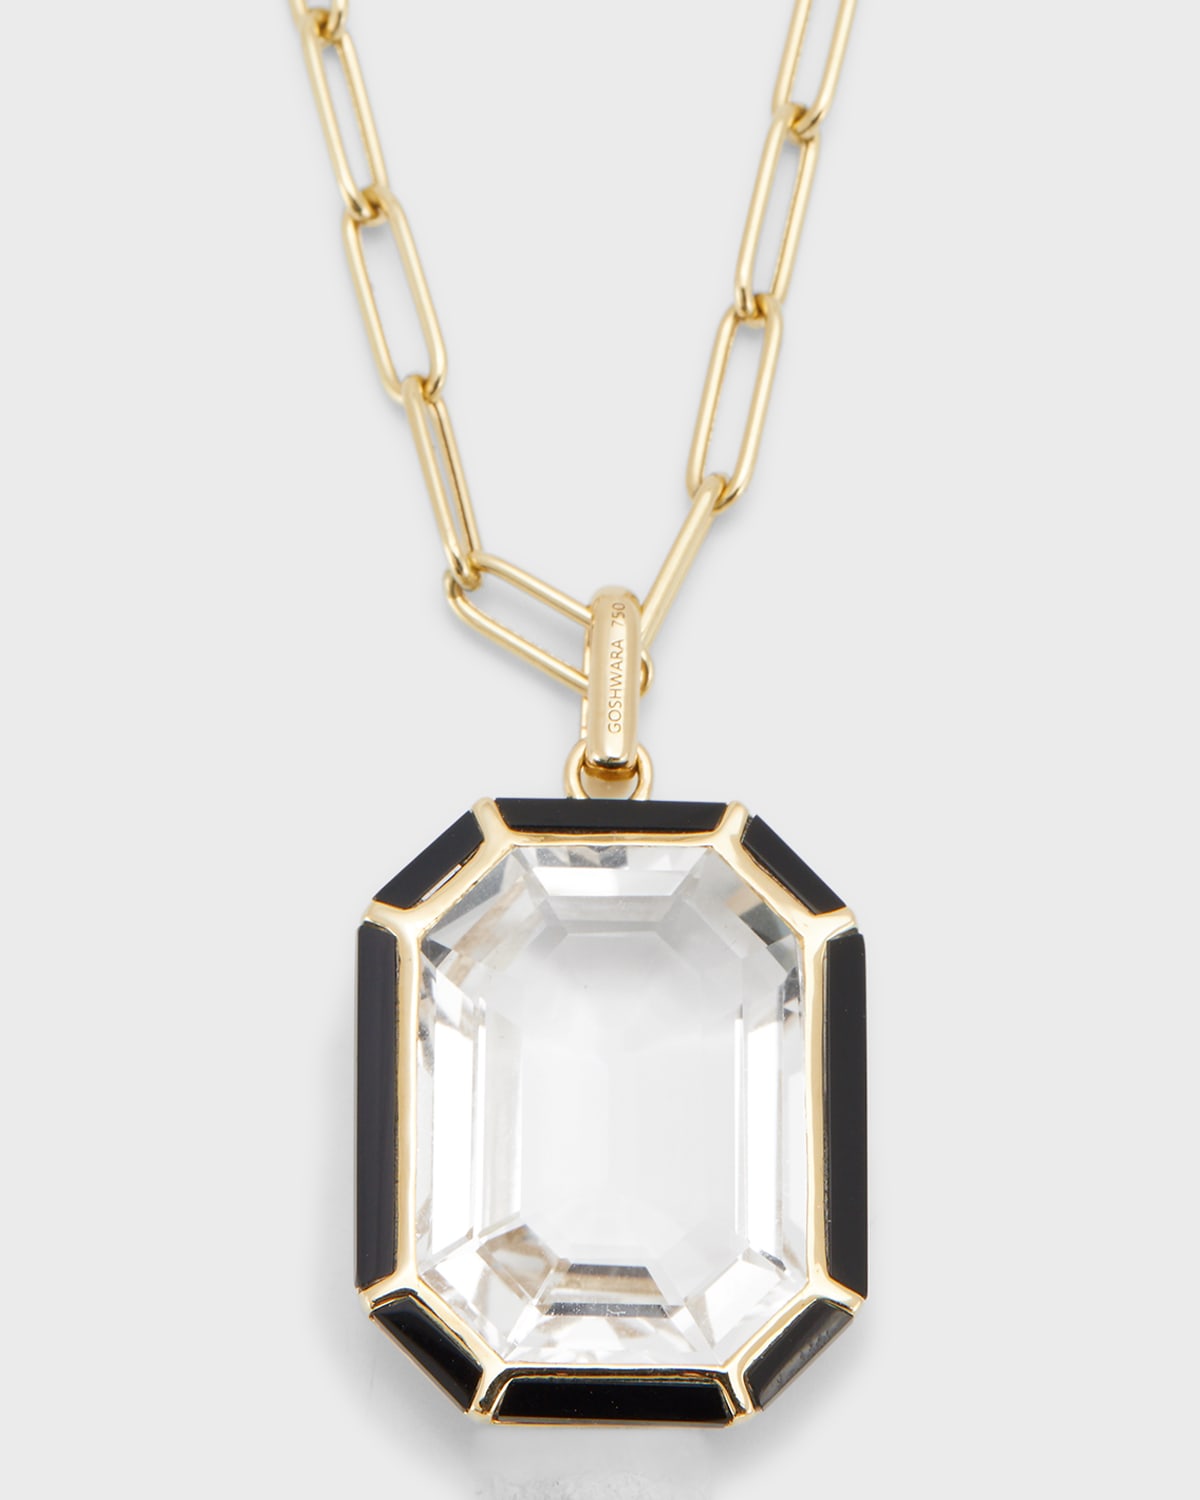 Goshwara 18k Gold Paperclip Chain Necklace With Emerald-cut Rock Crystal Pendant In Black, White